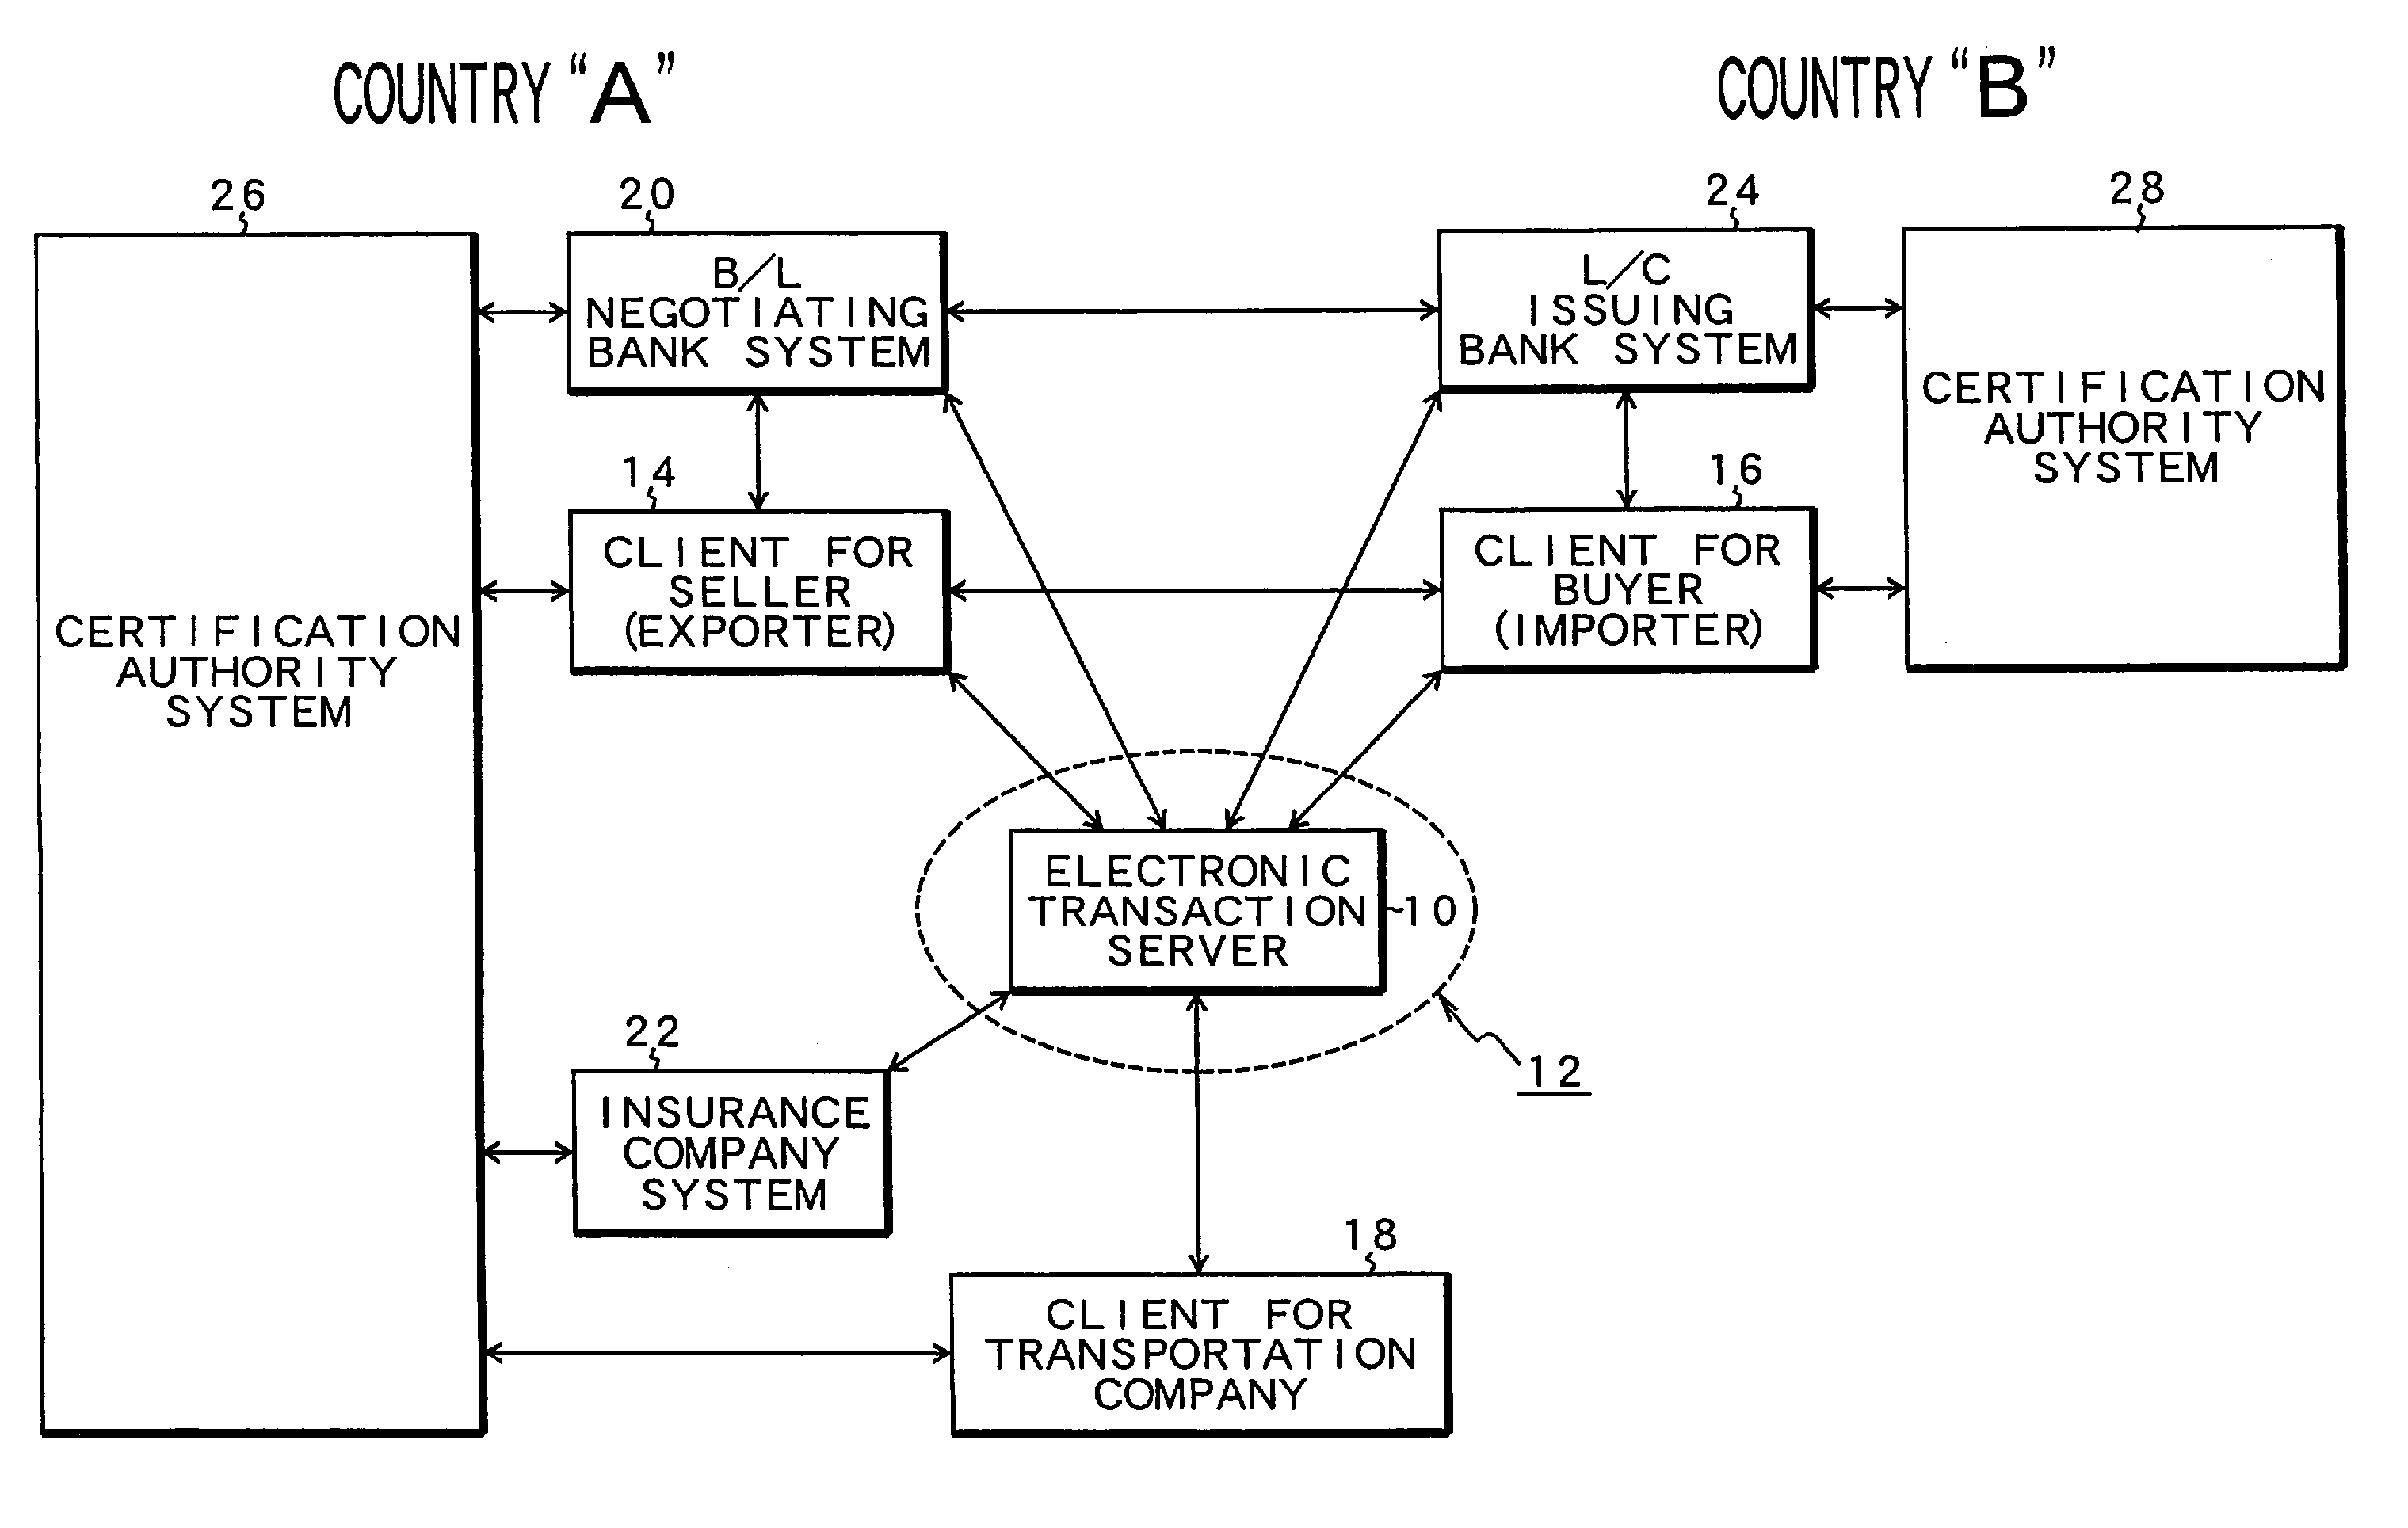 Electronic transaction server, client for seller, client for buyer and electronic transaction method